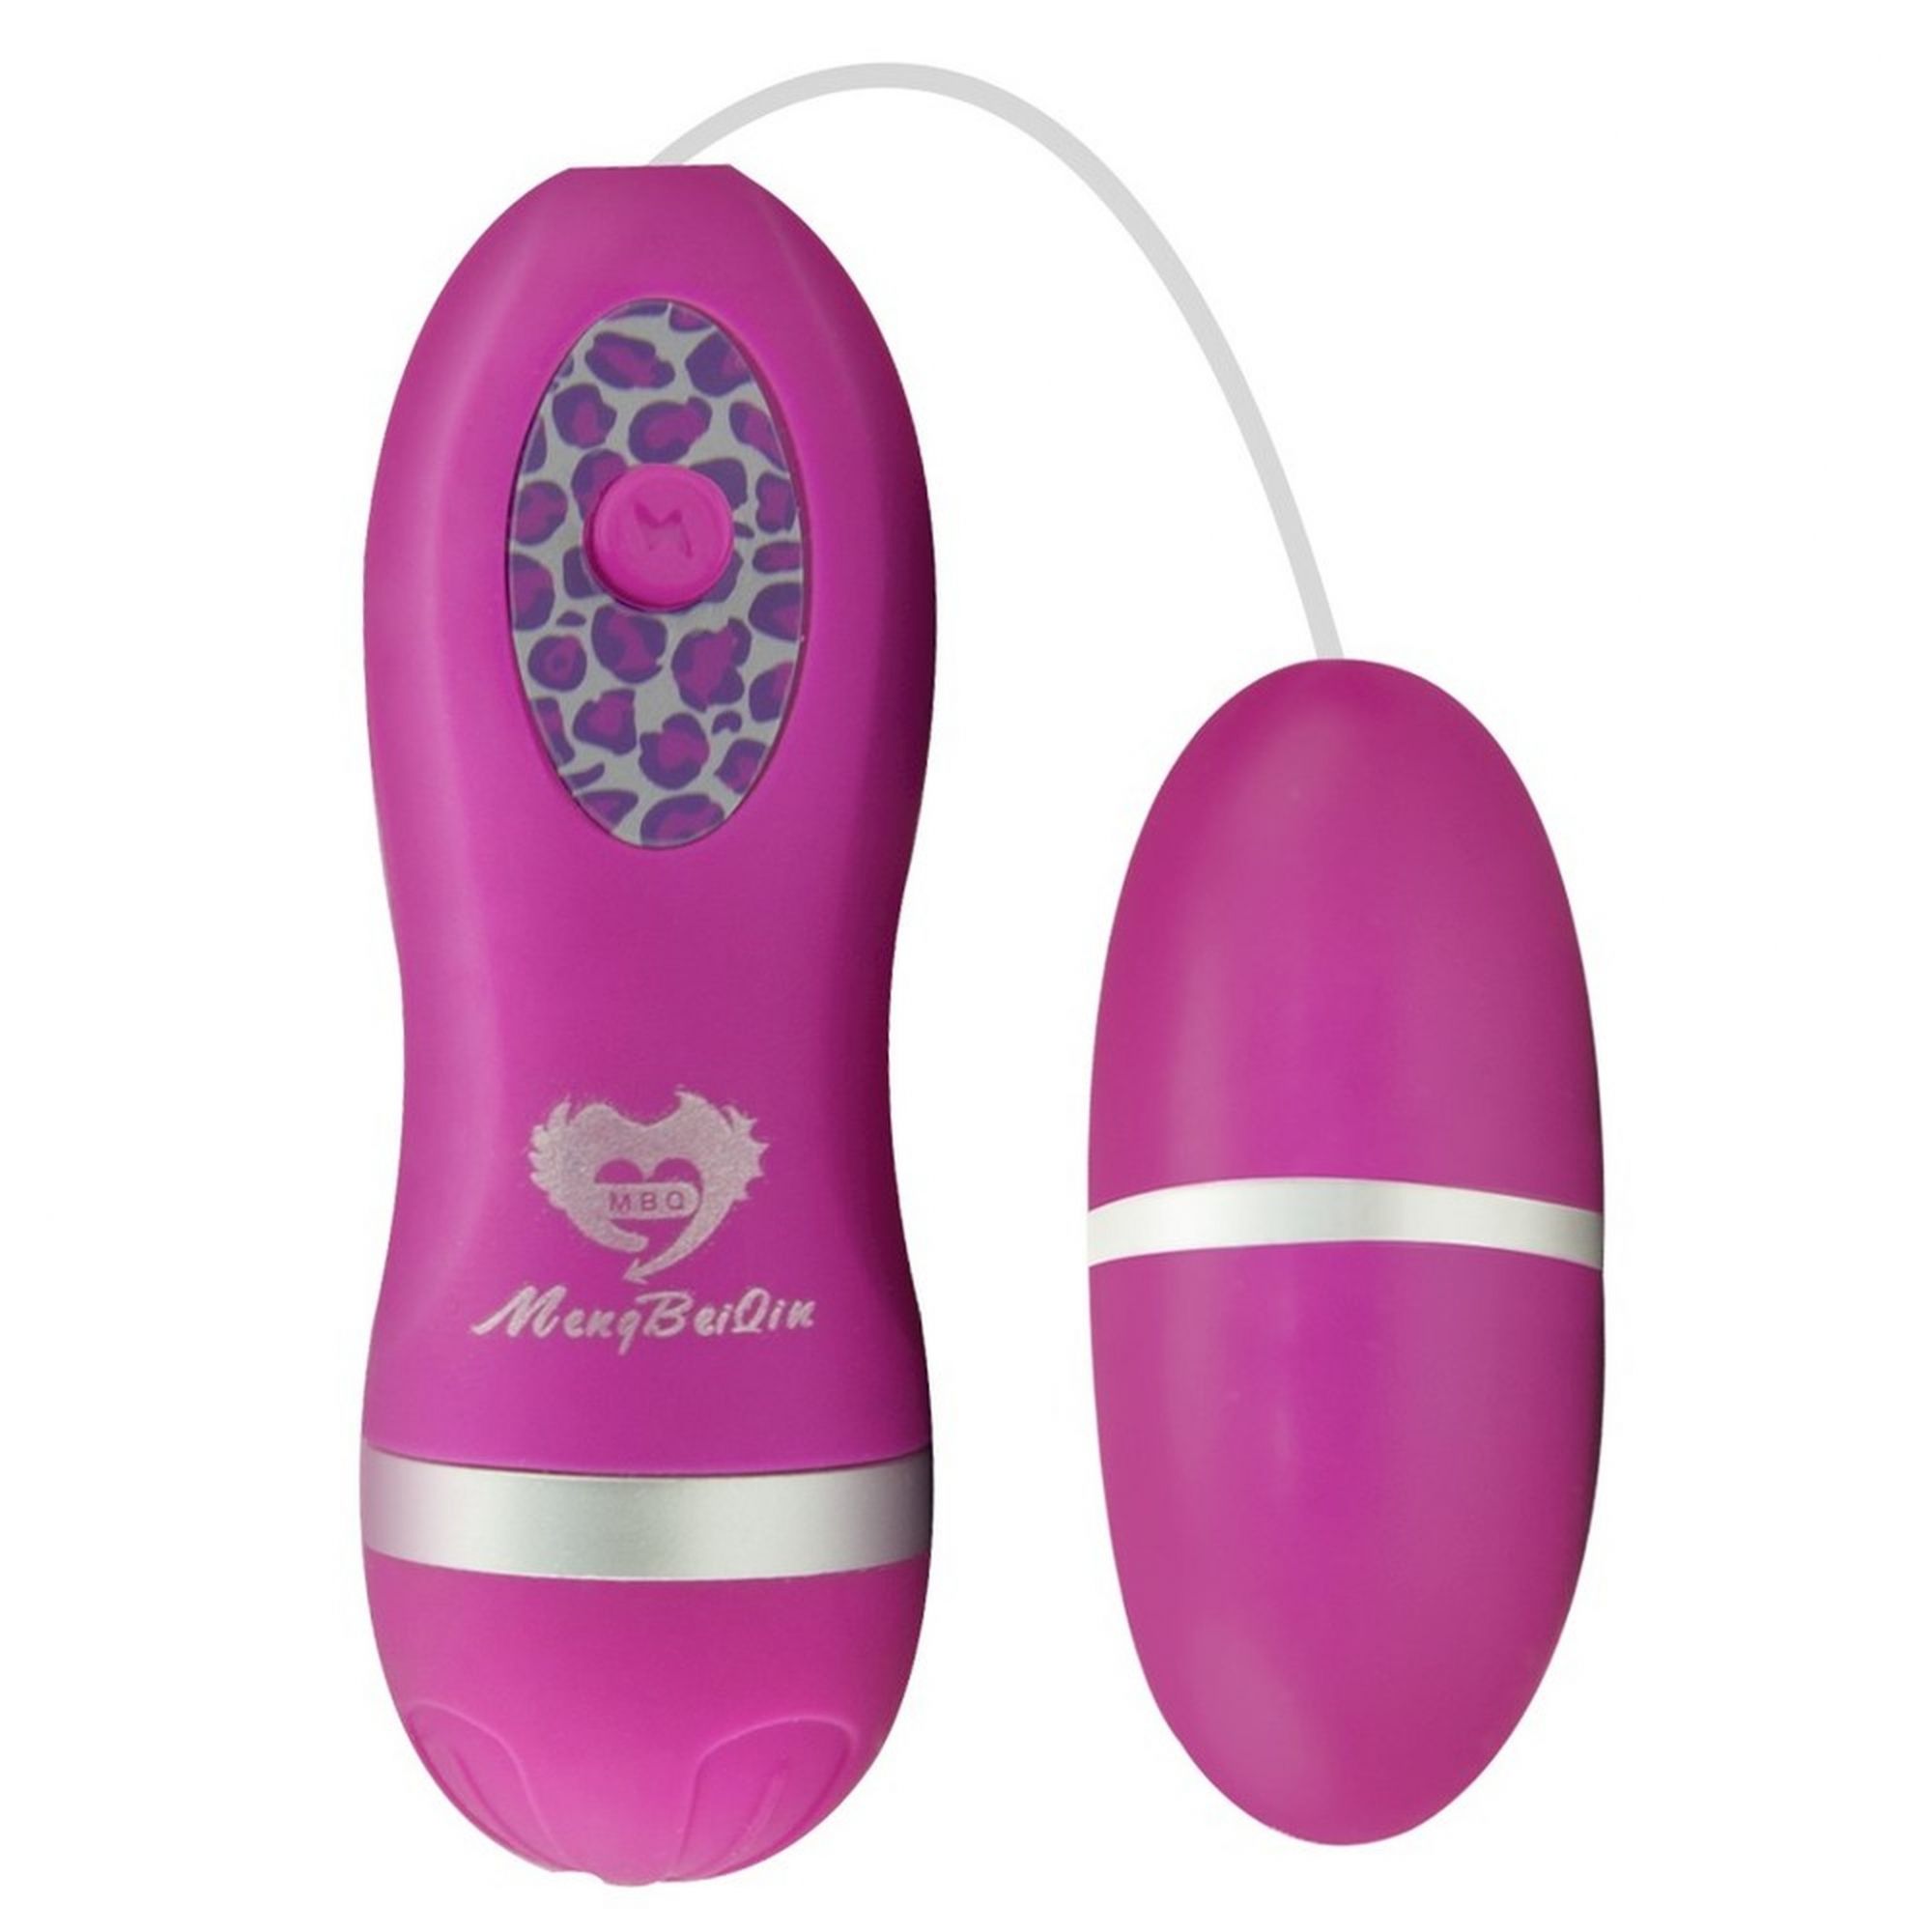 Buy Mbq Multi Speed Wireless Sex Toy Egg Vibrator Pink Online In India Adulttoys India